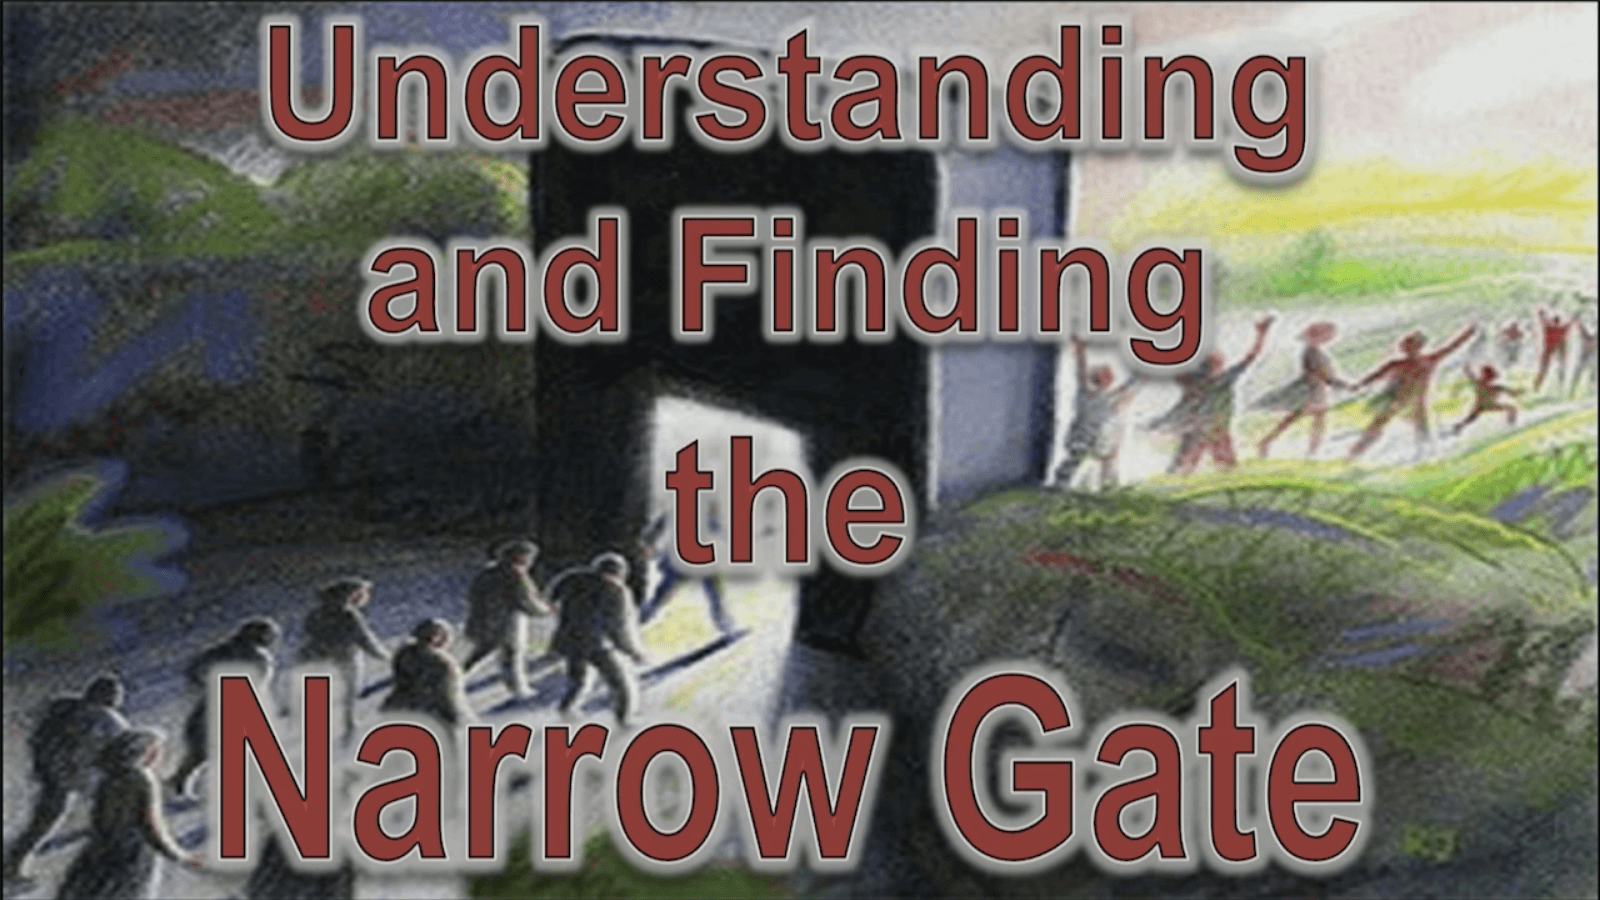 Understanding and Finding the Narrow Gate